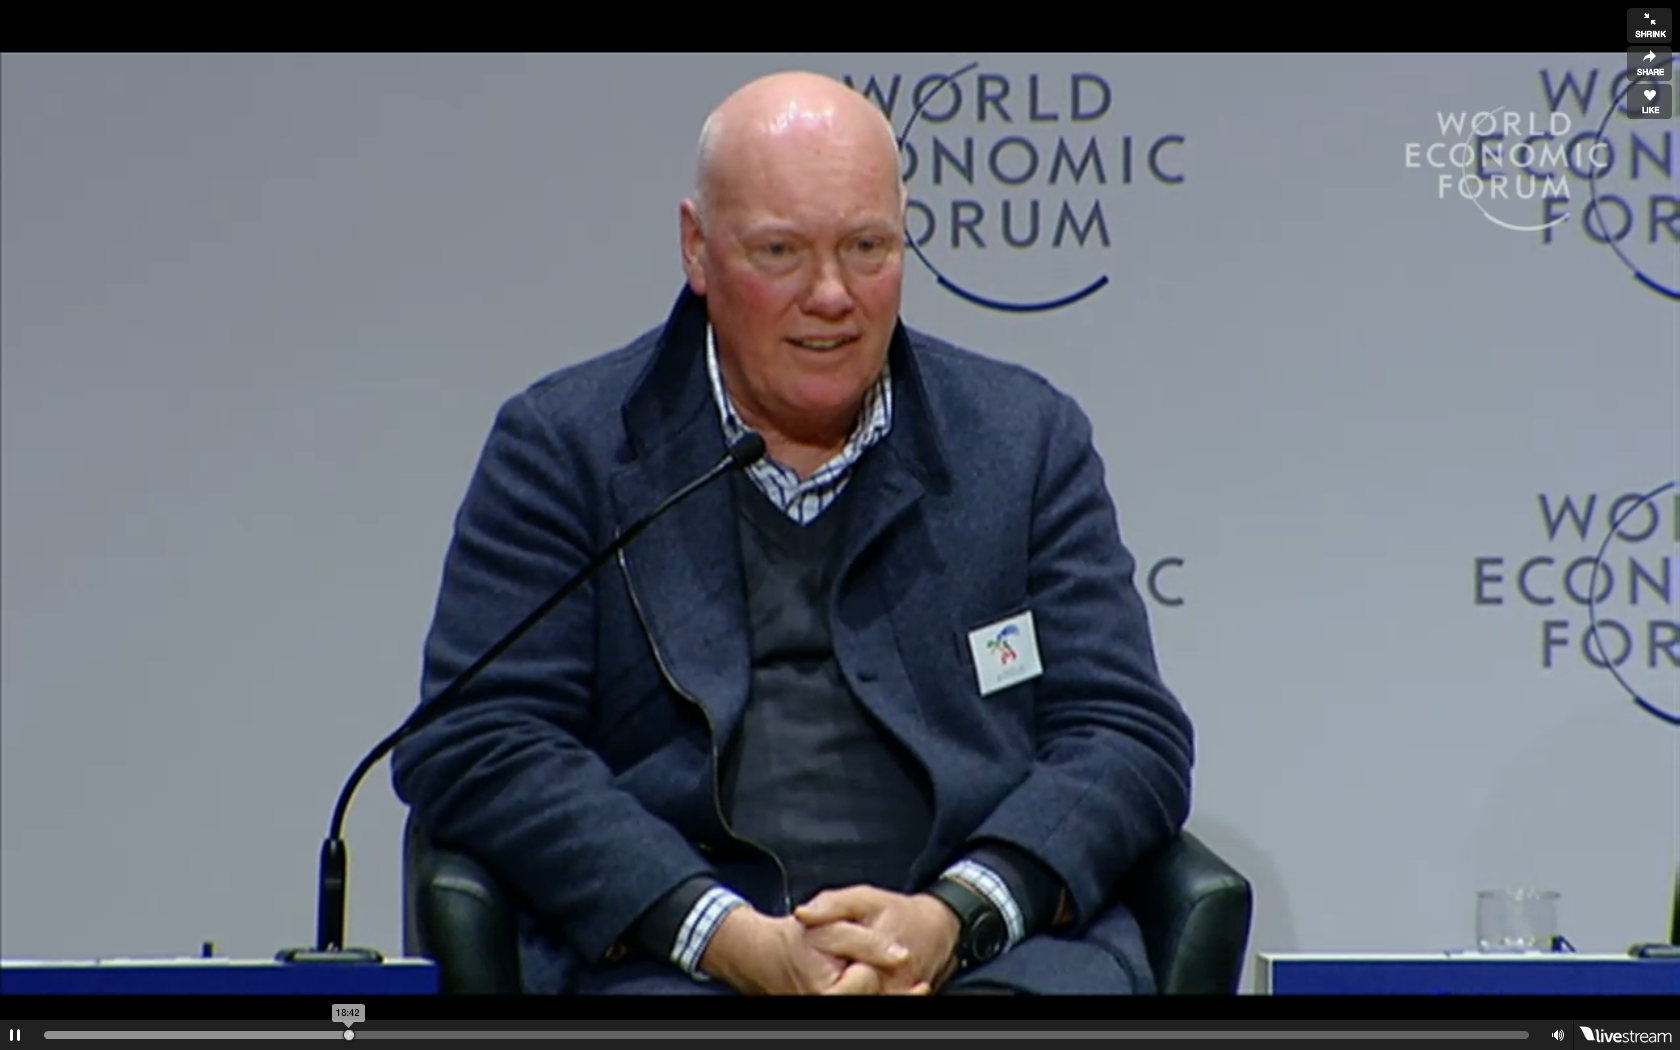 Jean-Claude Biver on Baselworld 2018 and the Digital Era